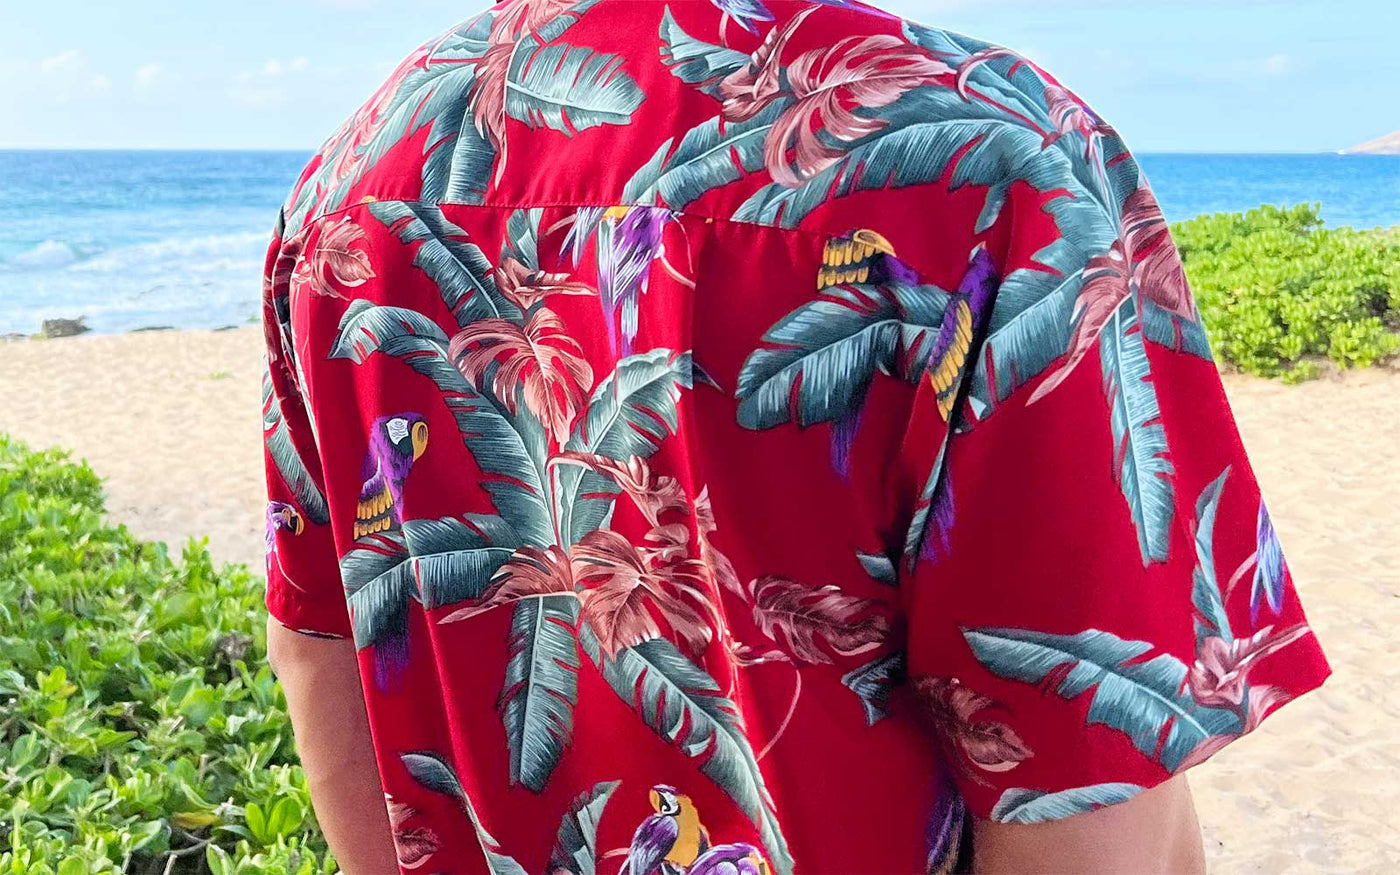 How the Hawaiian Shirt Connects Tom Selleck and Jay Hernandez